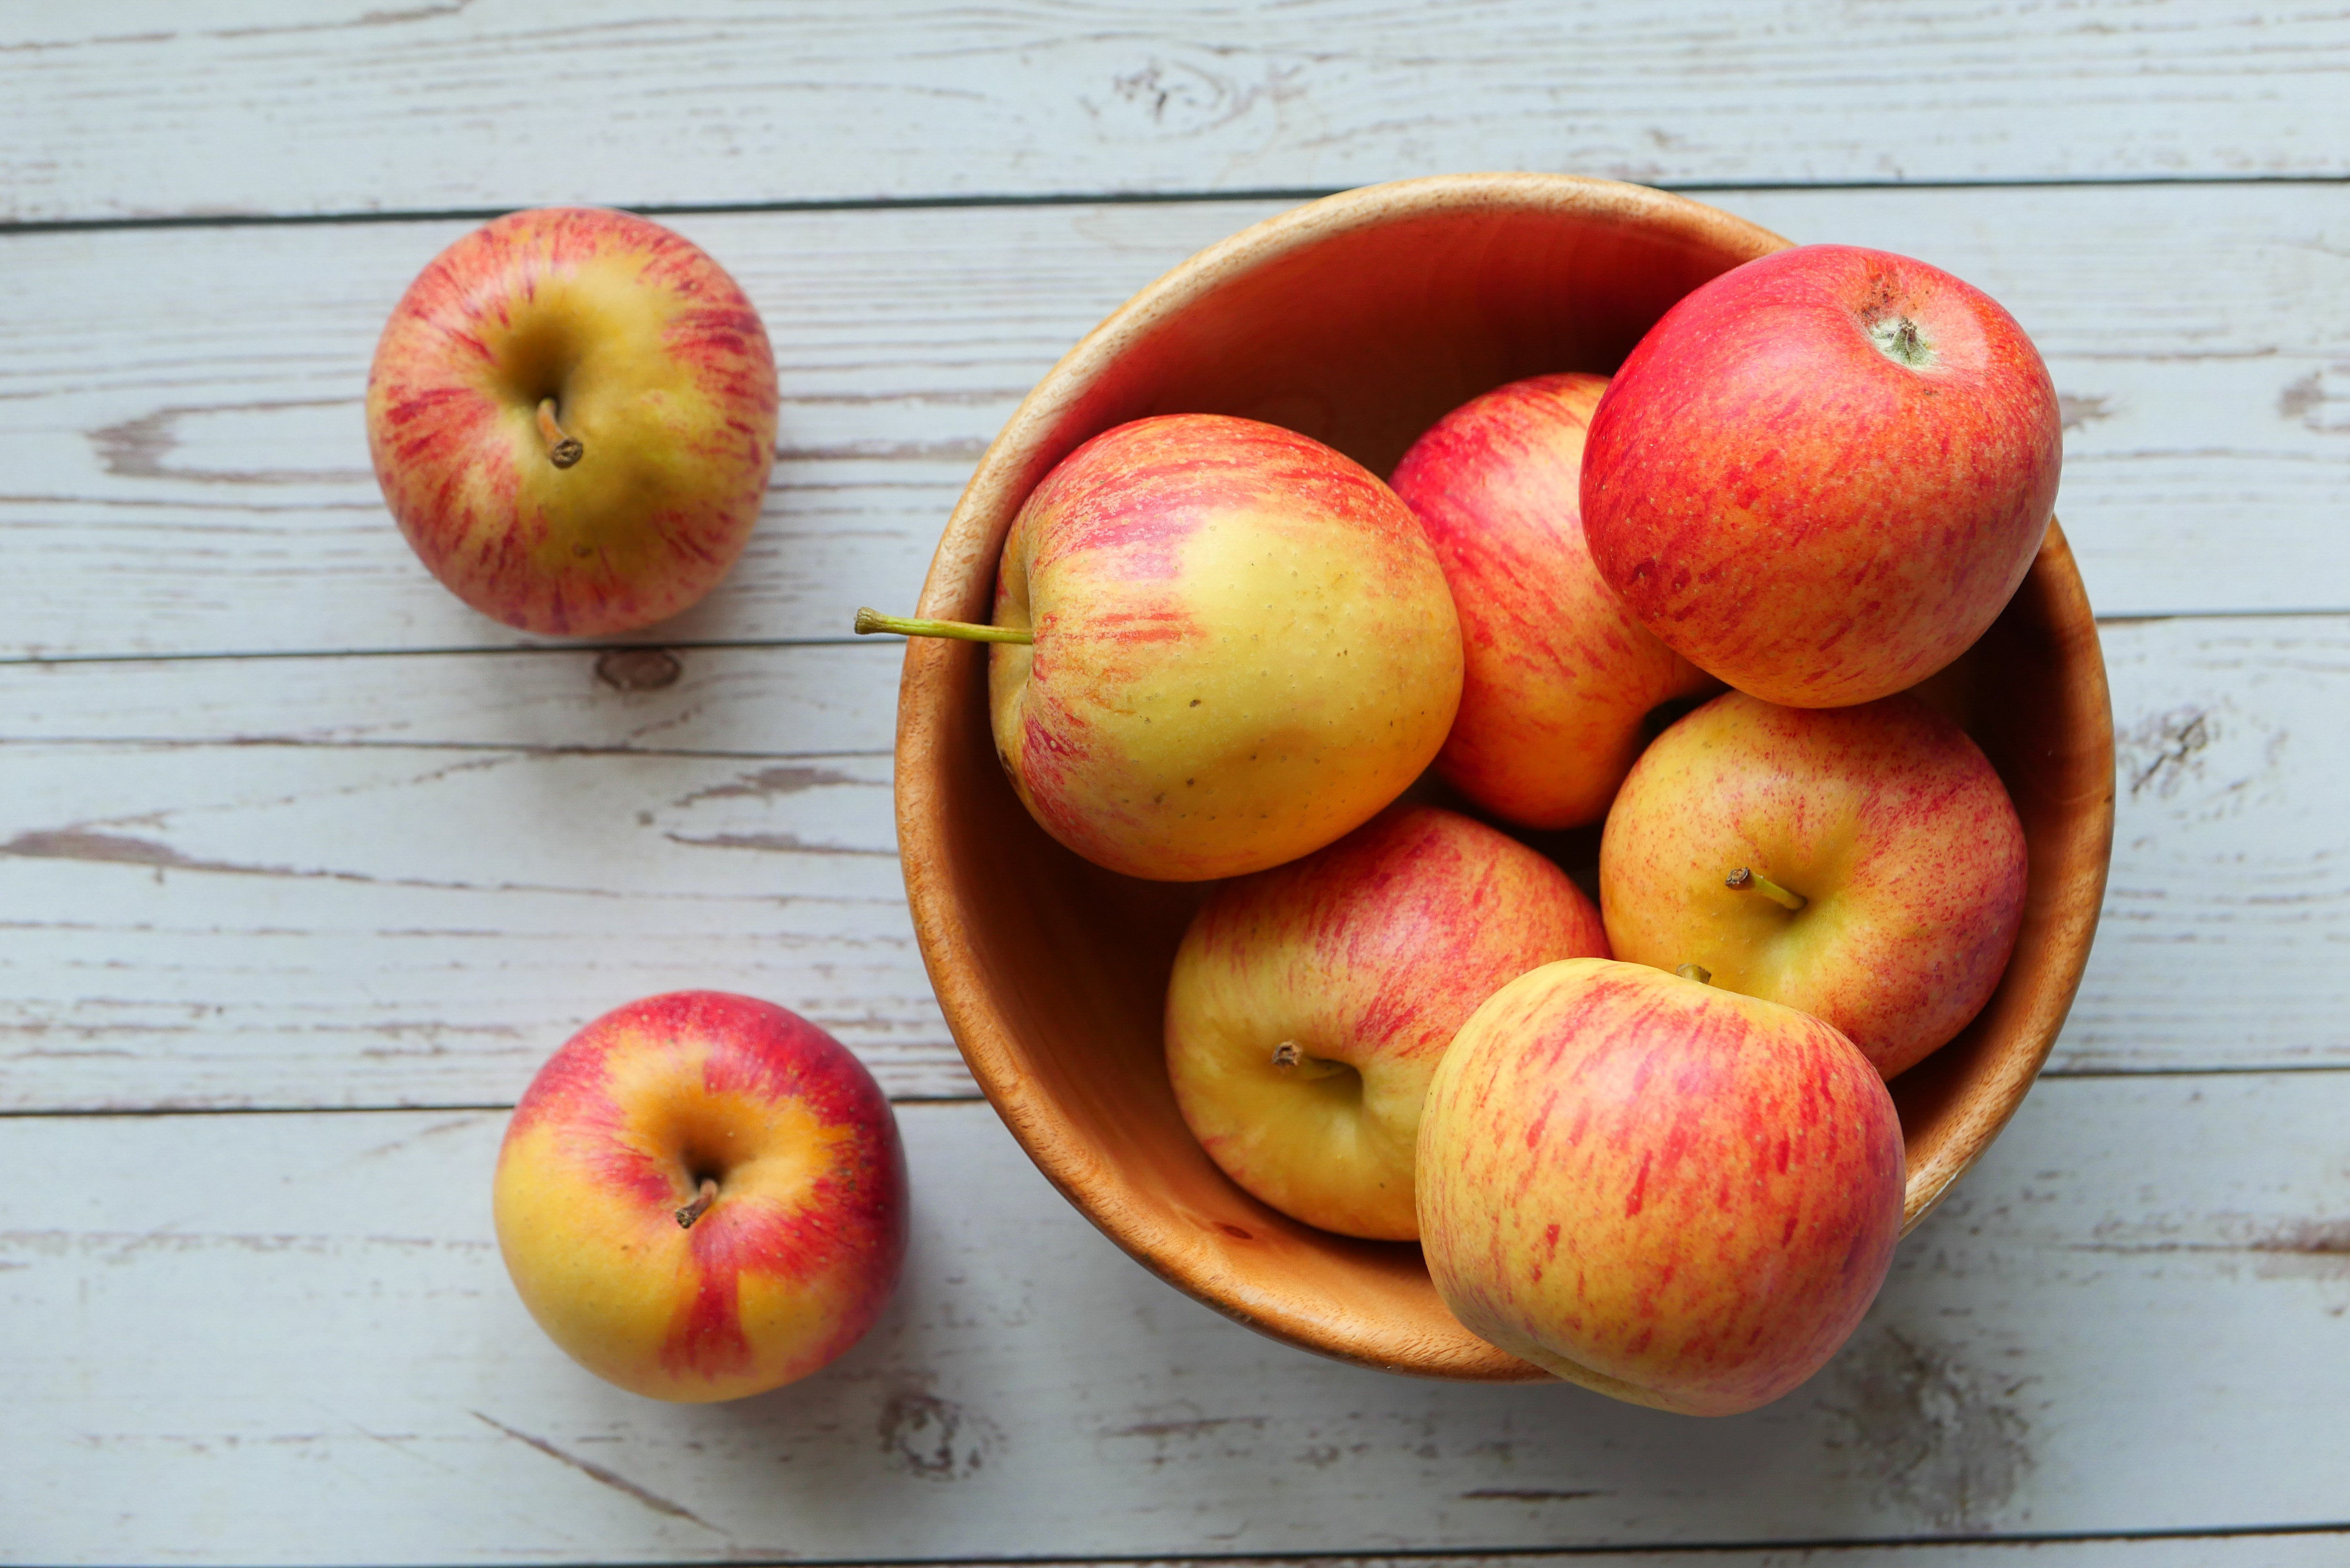 Breakfast at Your Desk: Have You Tried the New Opal Apples?